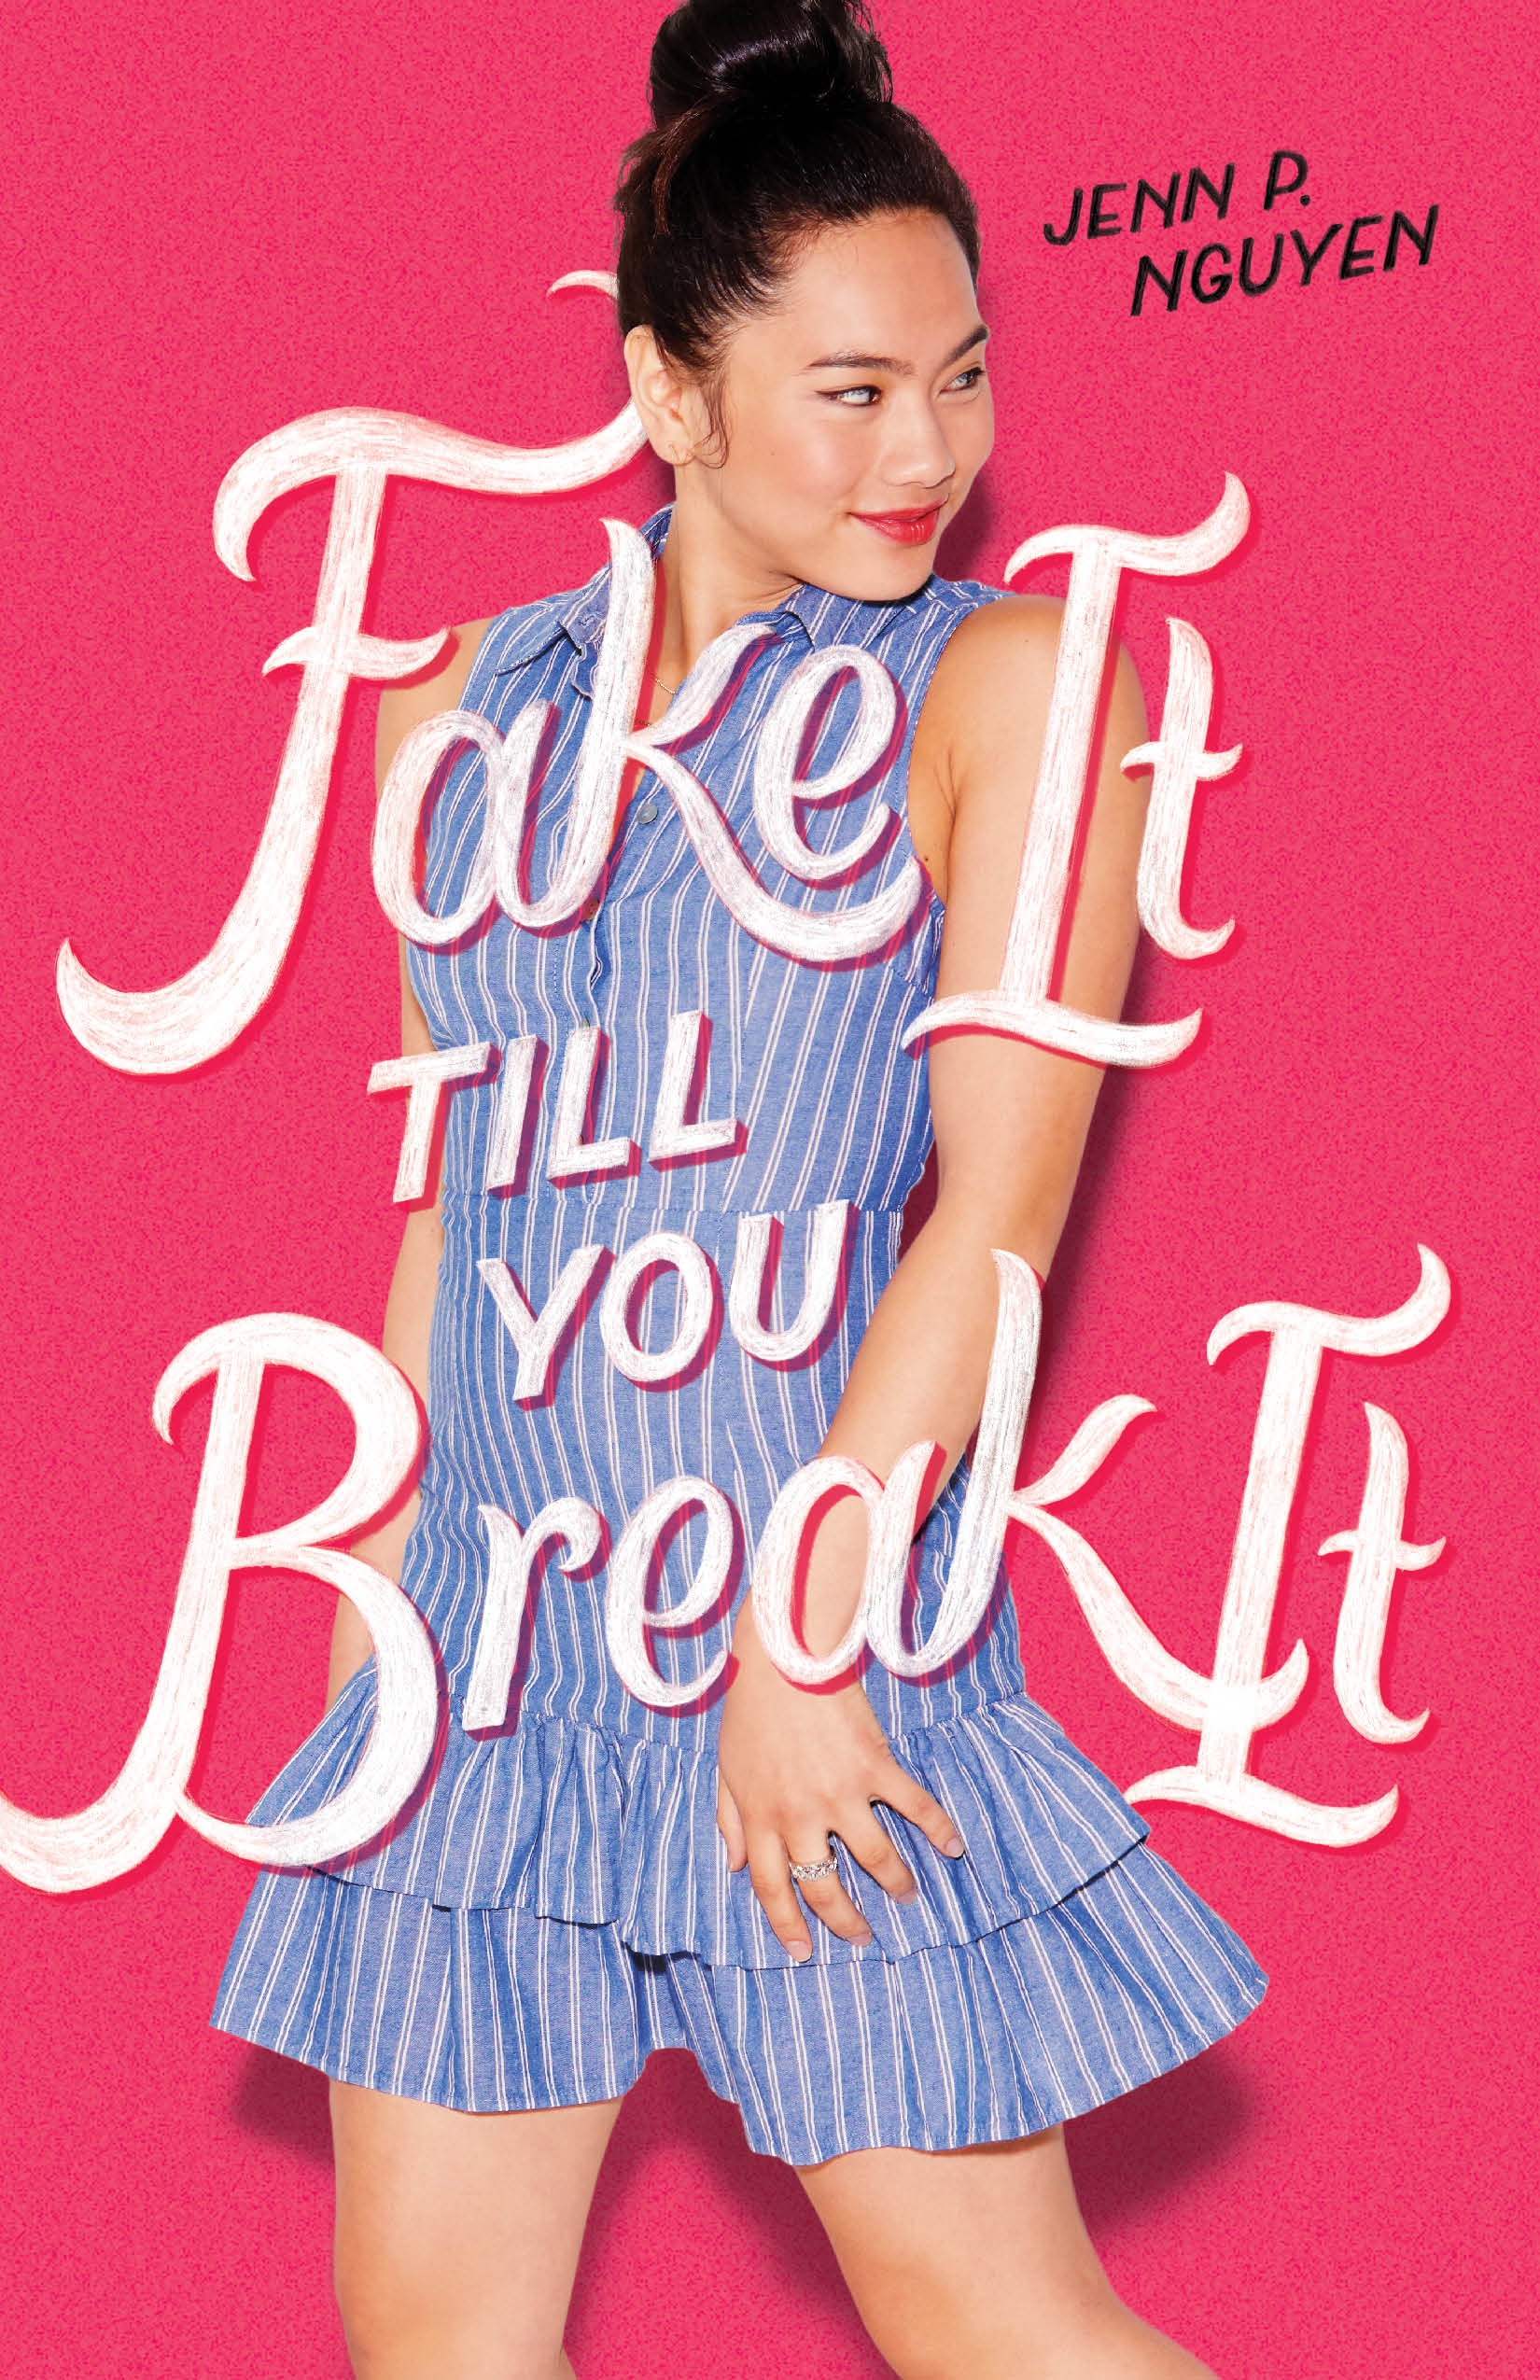 Images for Fake It Till You Break It